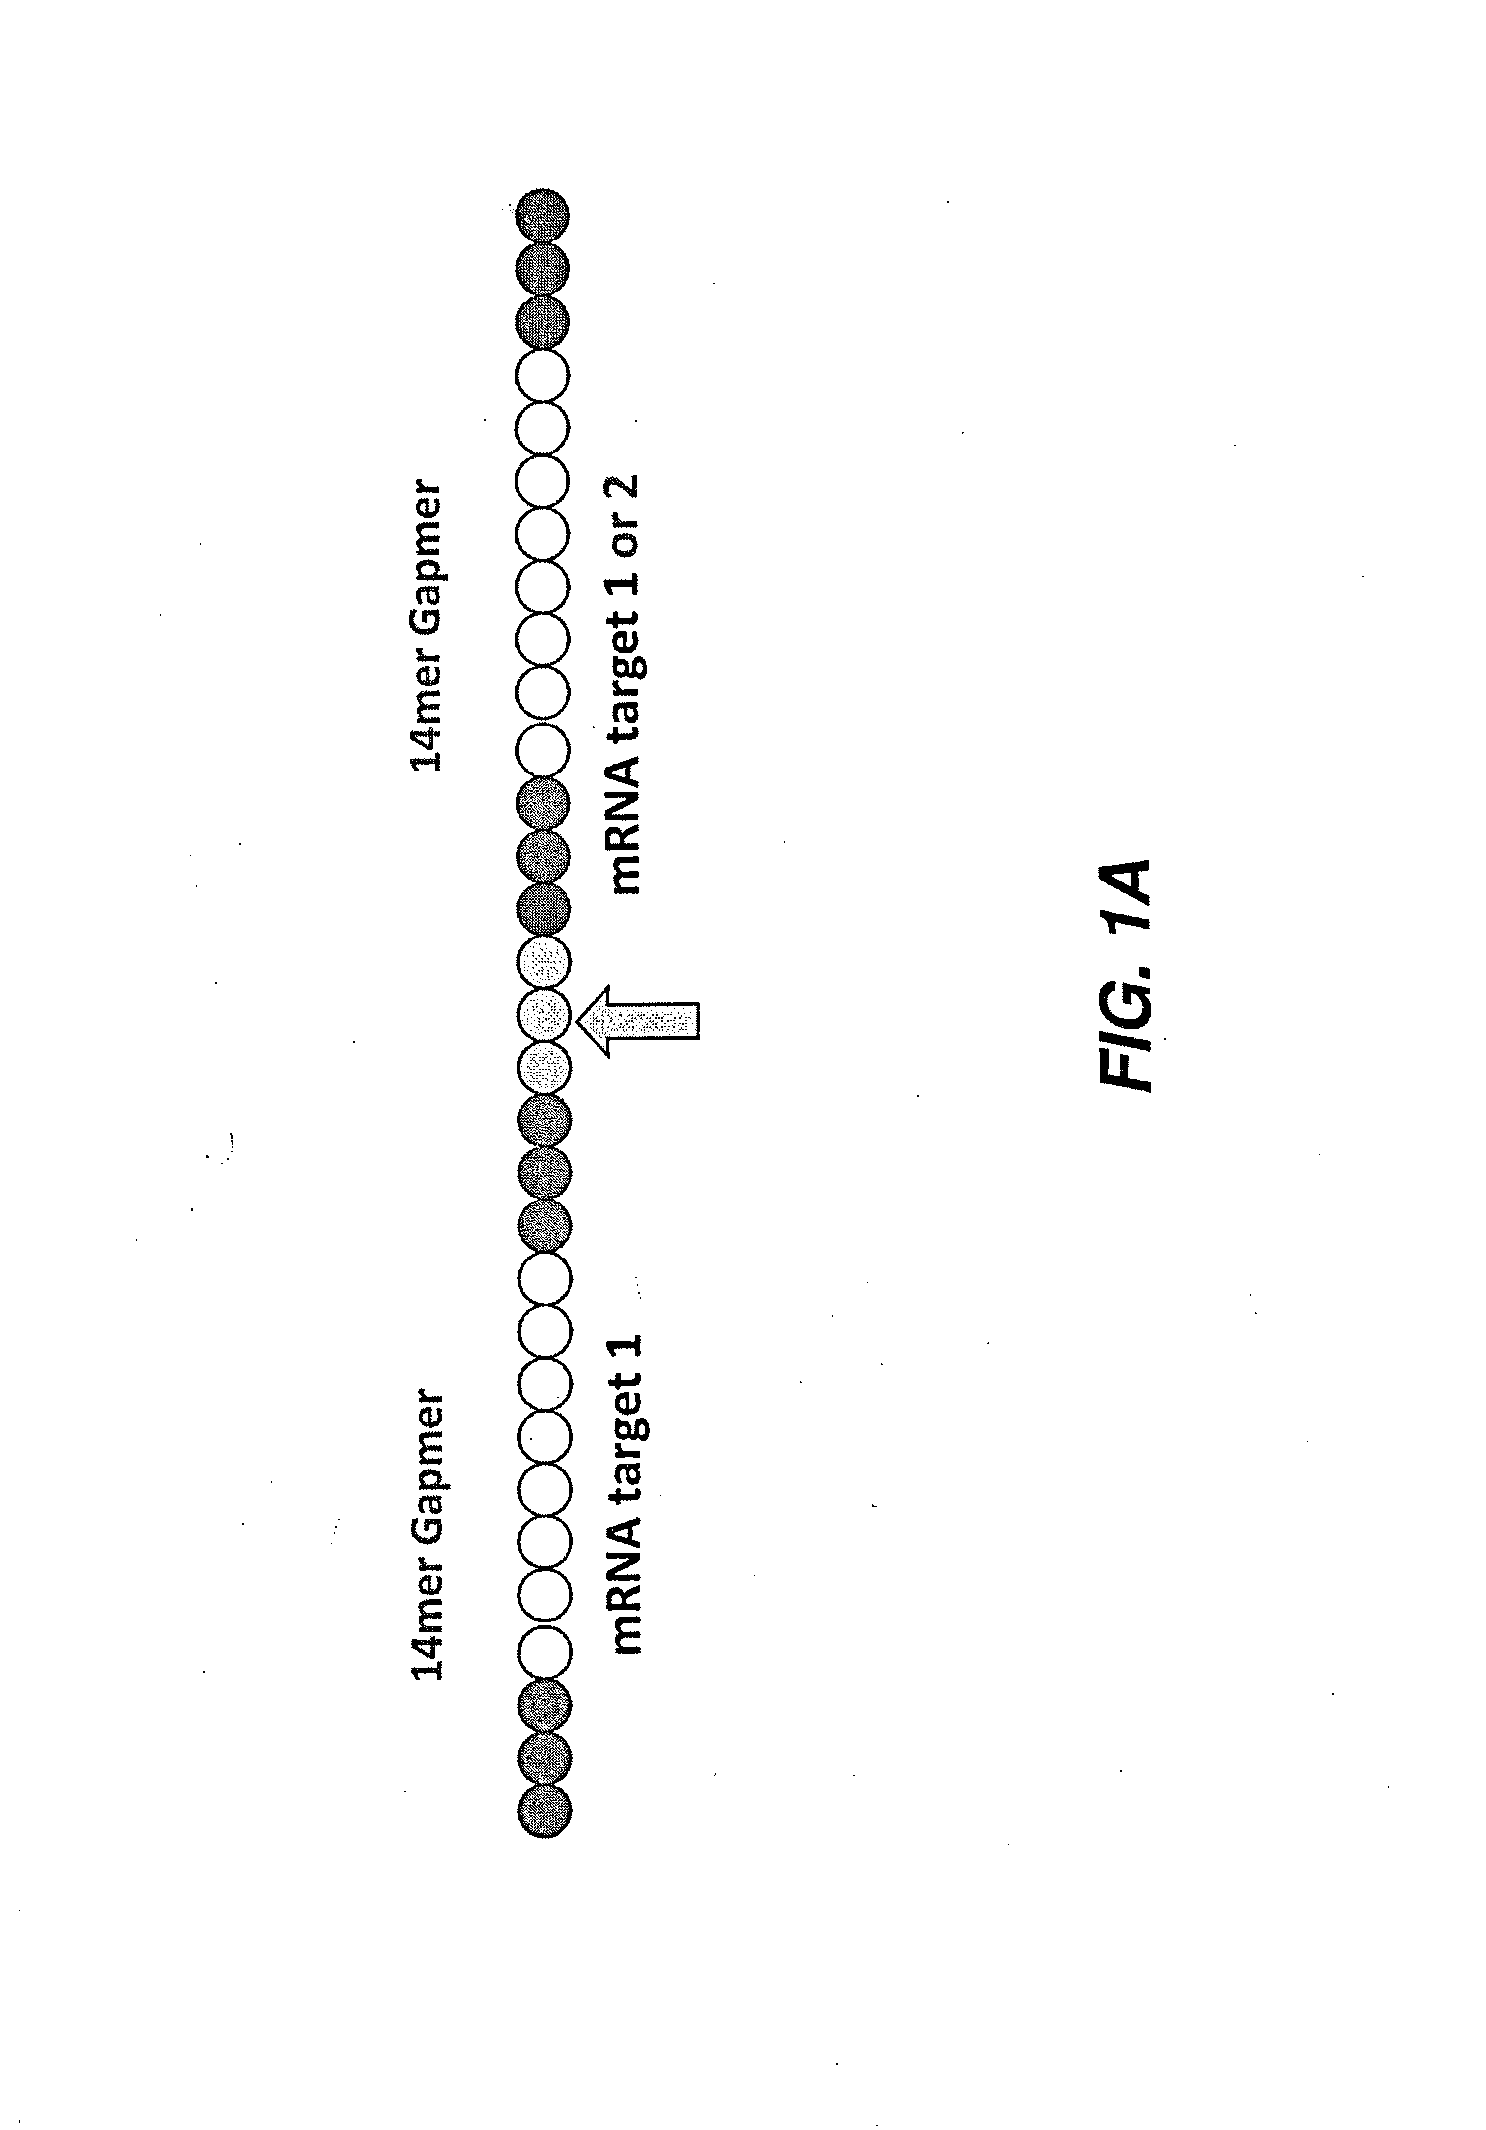 Methods of delivering multiple targeting oligonucleotides to a cell using cleavable linkers